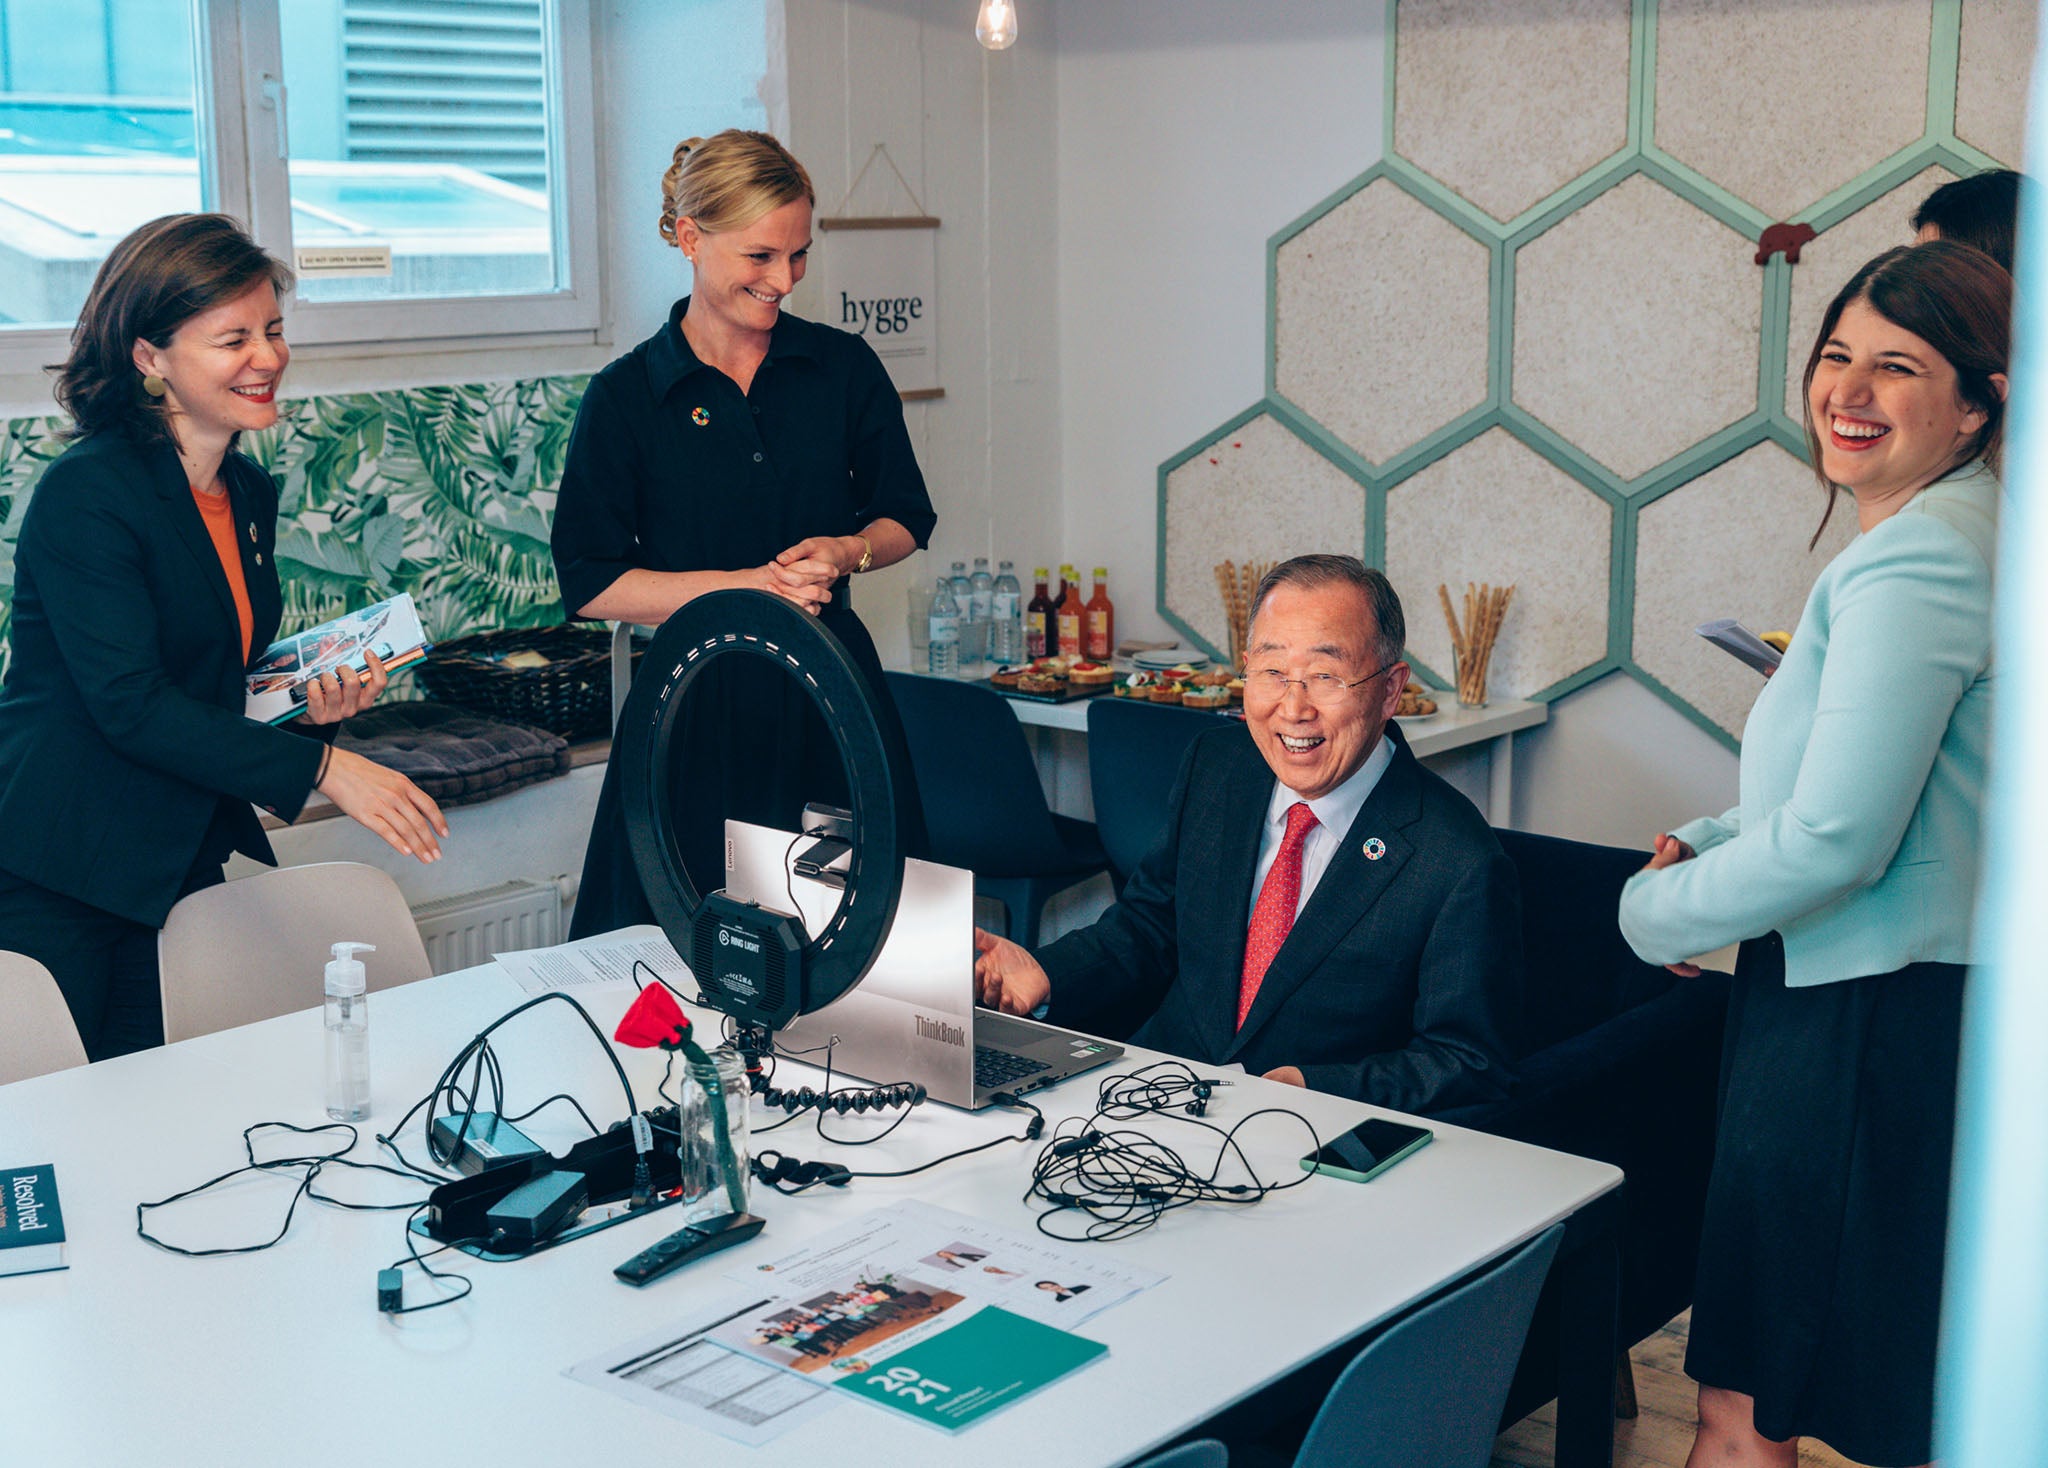 Ban Ki-moon with his team in Vienna on Tuesday during his interview with The Independent